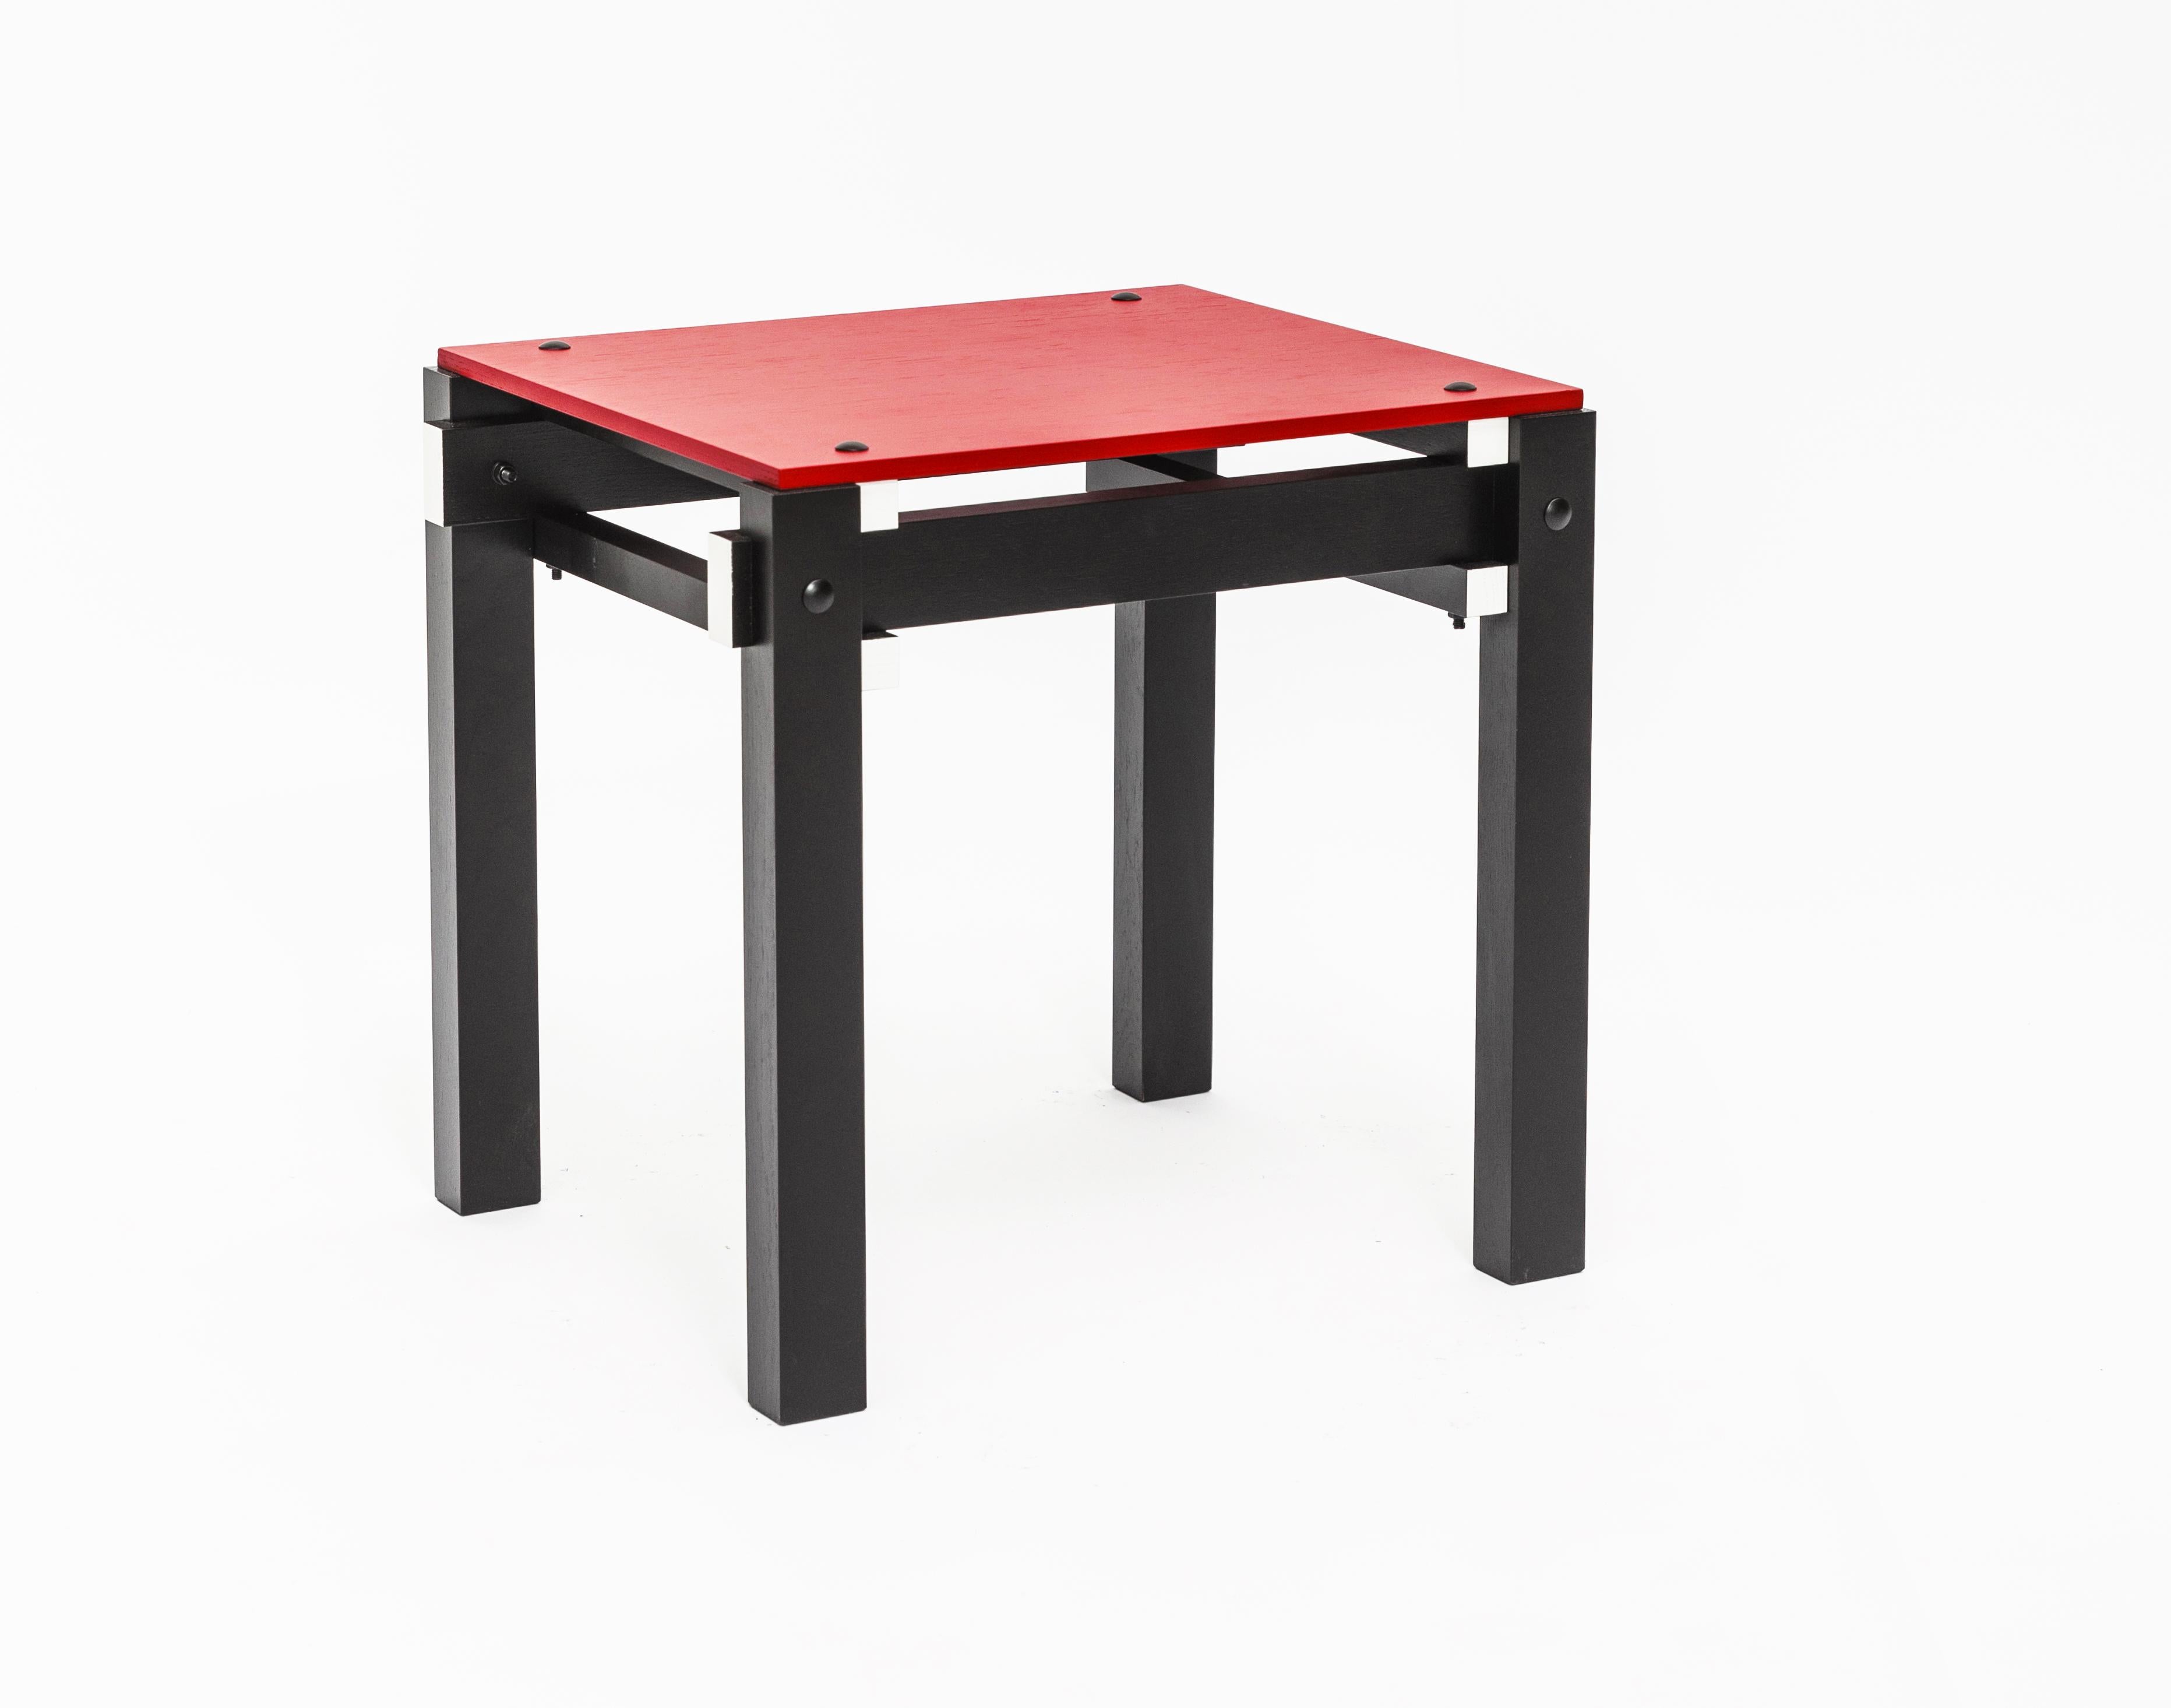 Stool / side table

The Rietveld Military Furniture was designed in 1923 by Gerrit Rietveld for a Catholic Military Home in Utrecht, the Netherlands. The Military series was the first to use nuts and bolts instead of wooden dowels. The military